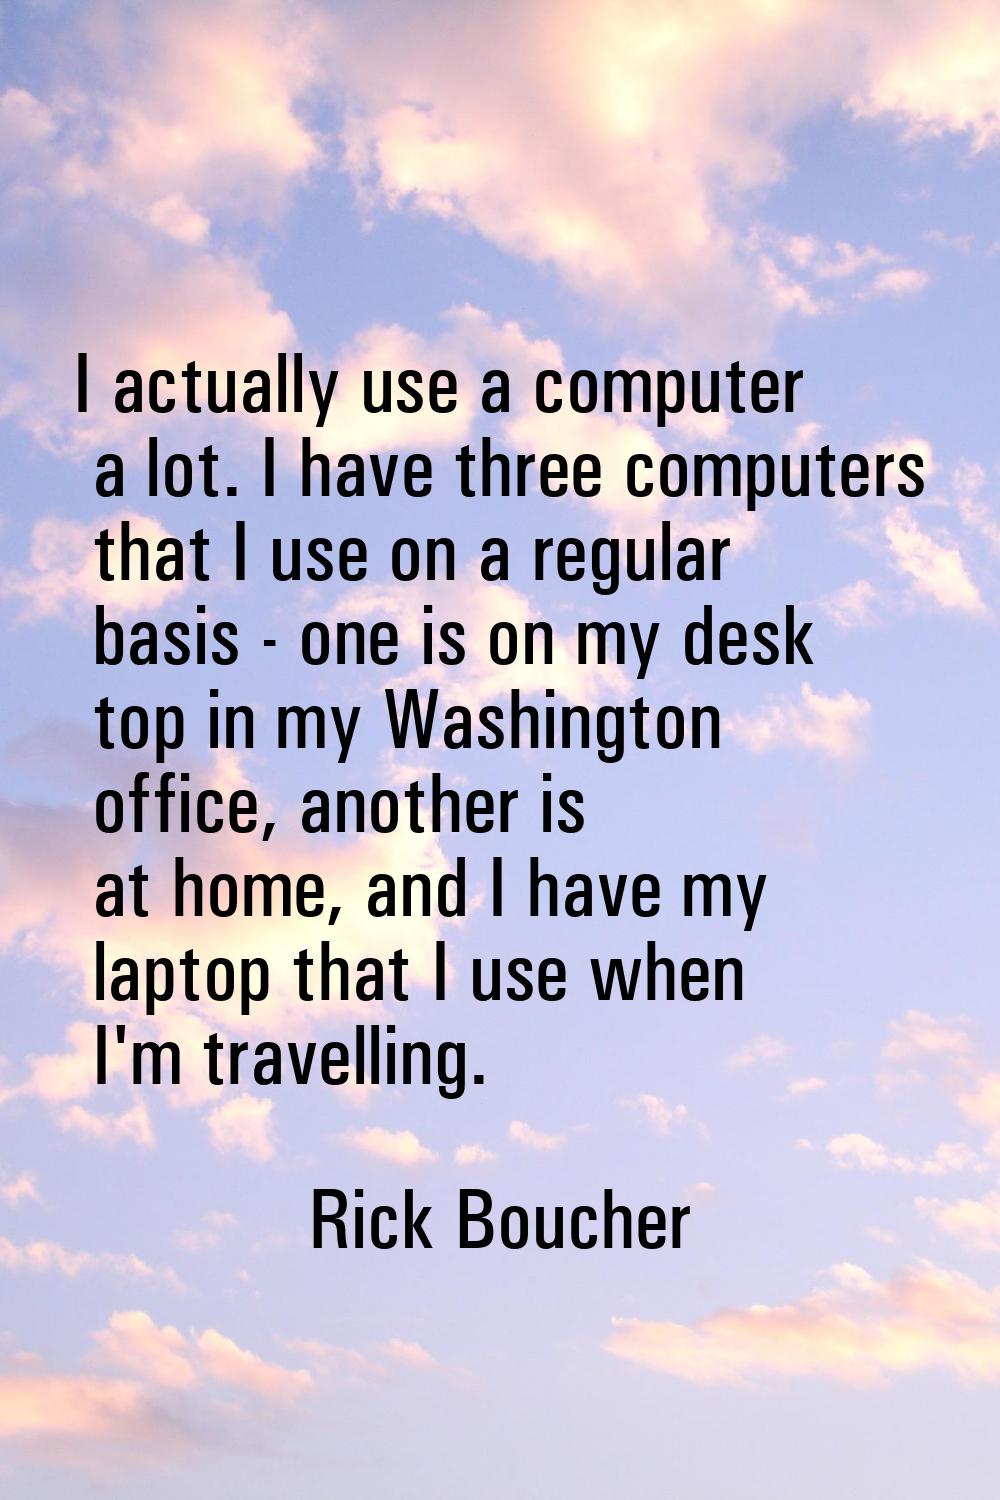 I actually use a computer a lot. I have three computers that I use on a regular basis - one is on m